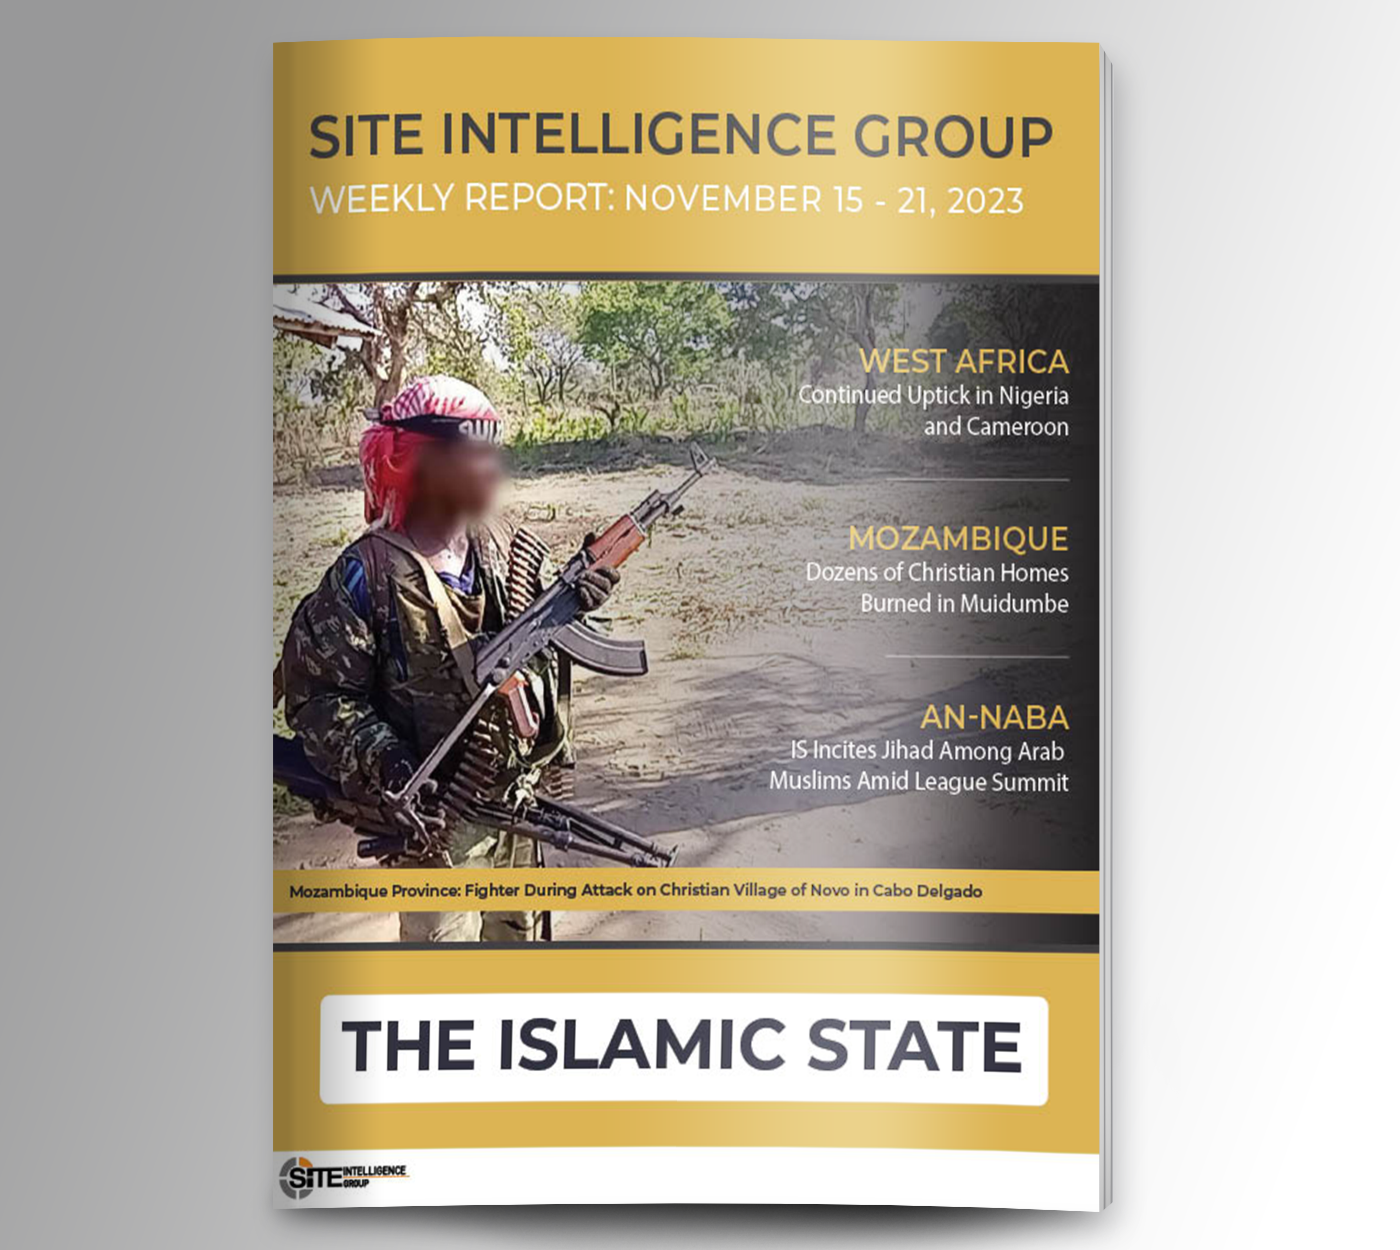 Weekly inSITE on the Islamic State for November 15-21, 2023